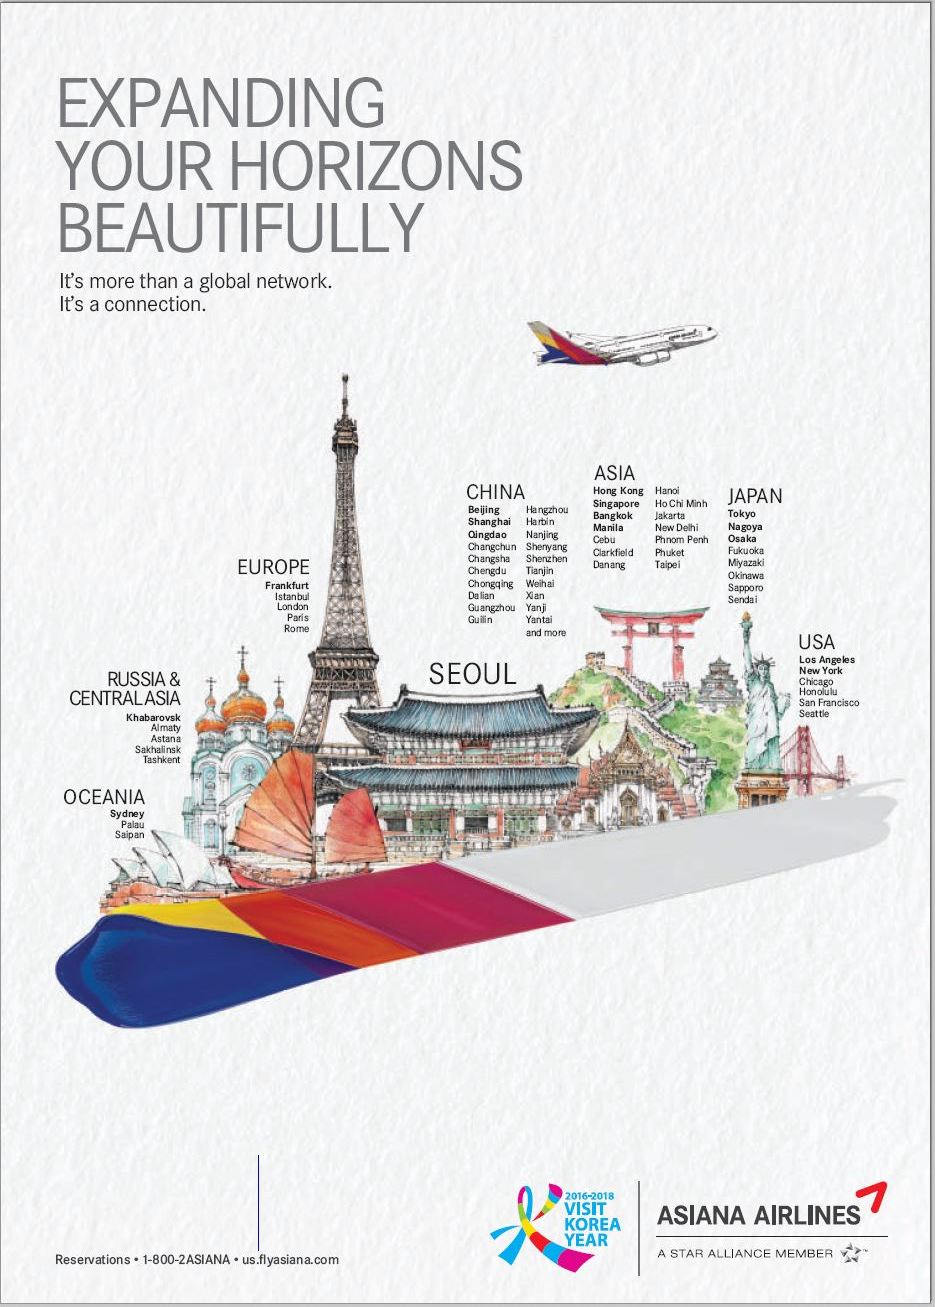 Asiana Airlines: Expanding your horizons beautifully